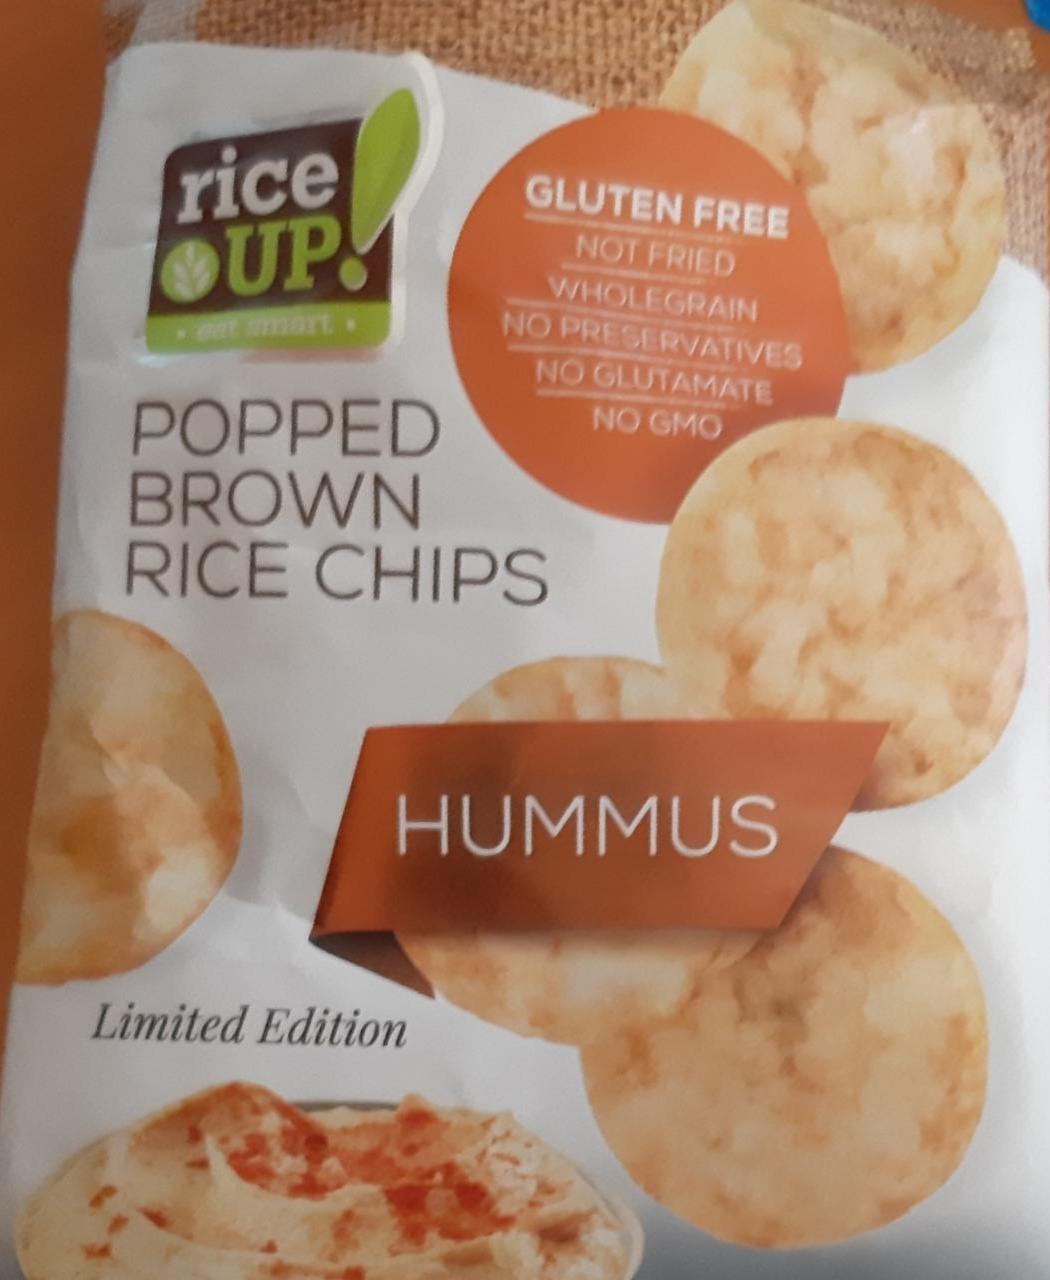 Фото - Popped Brown Rice Chips Hummus Rice up!